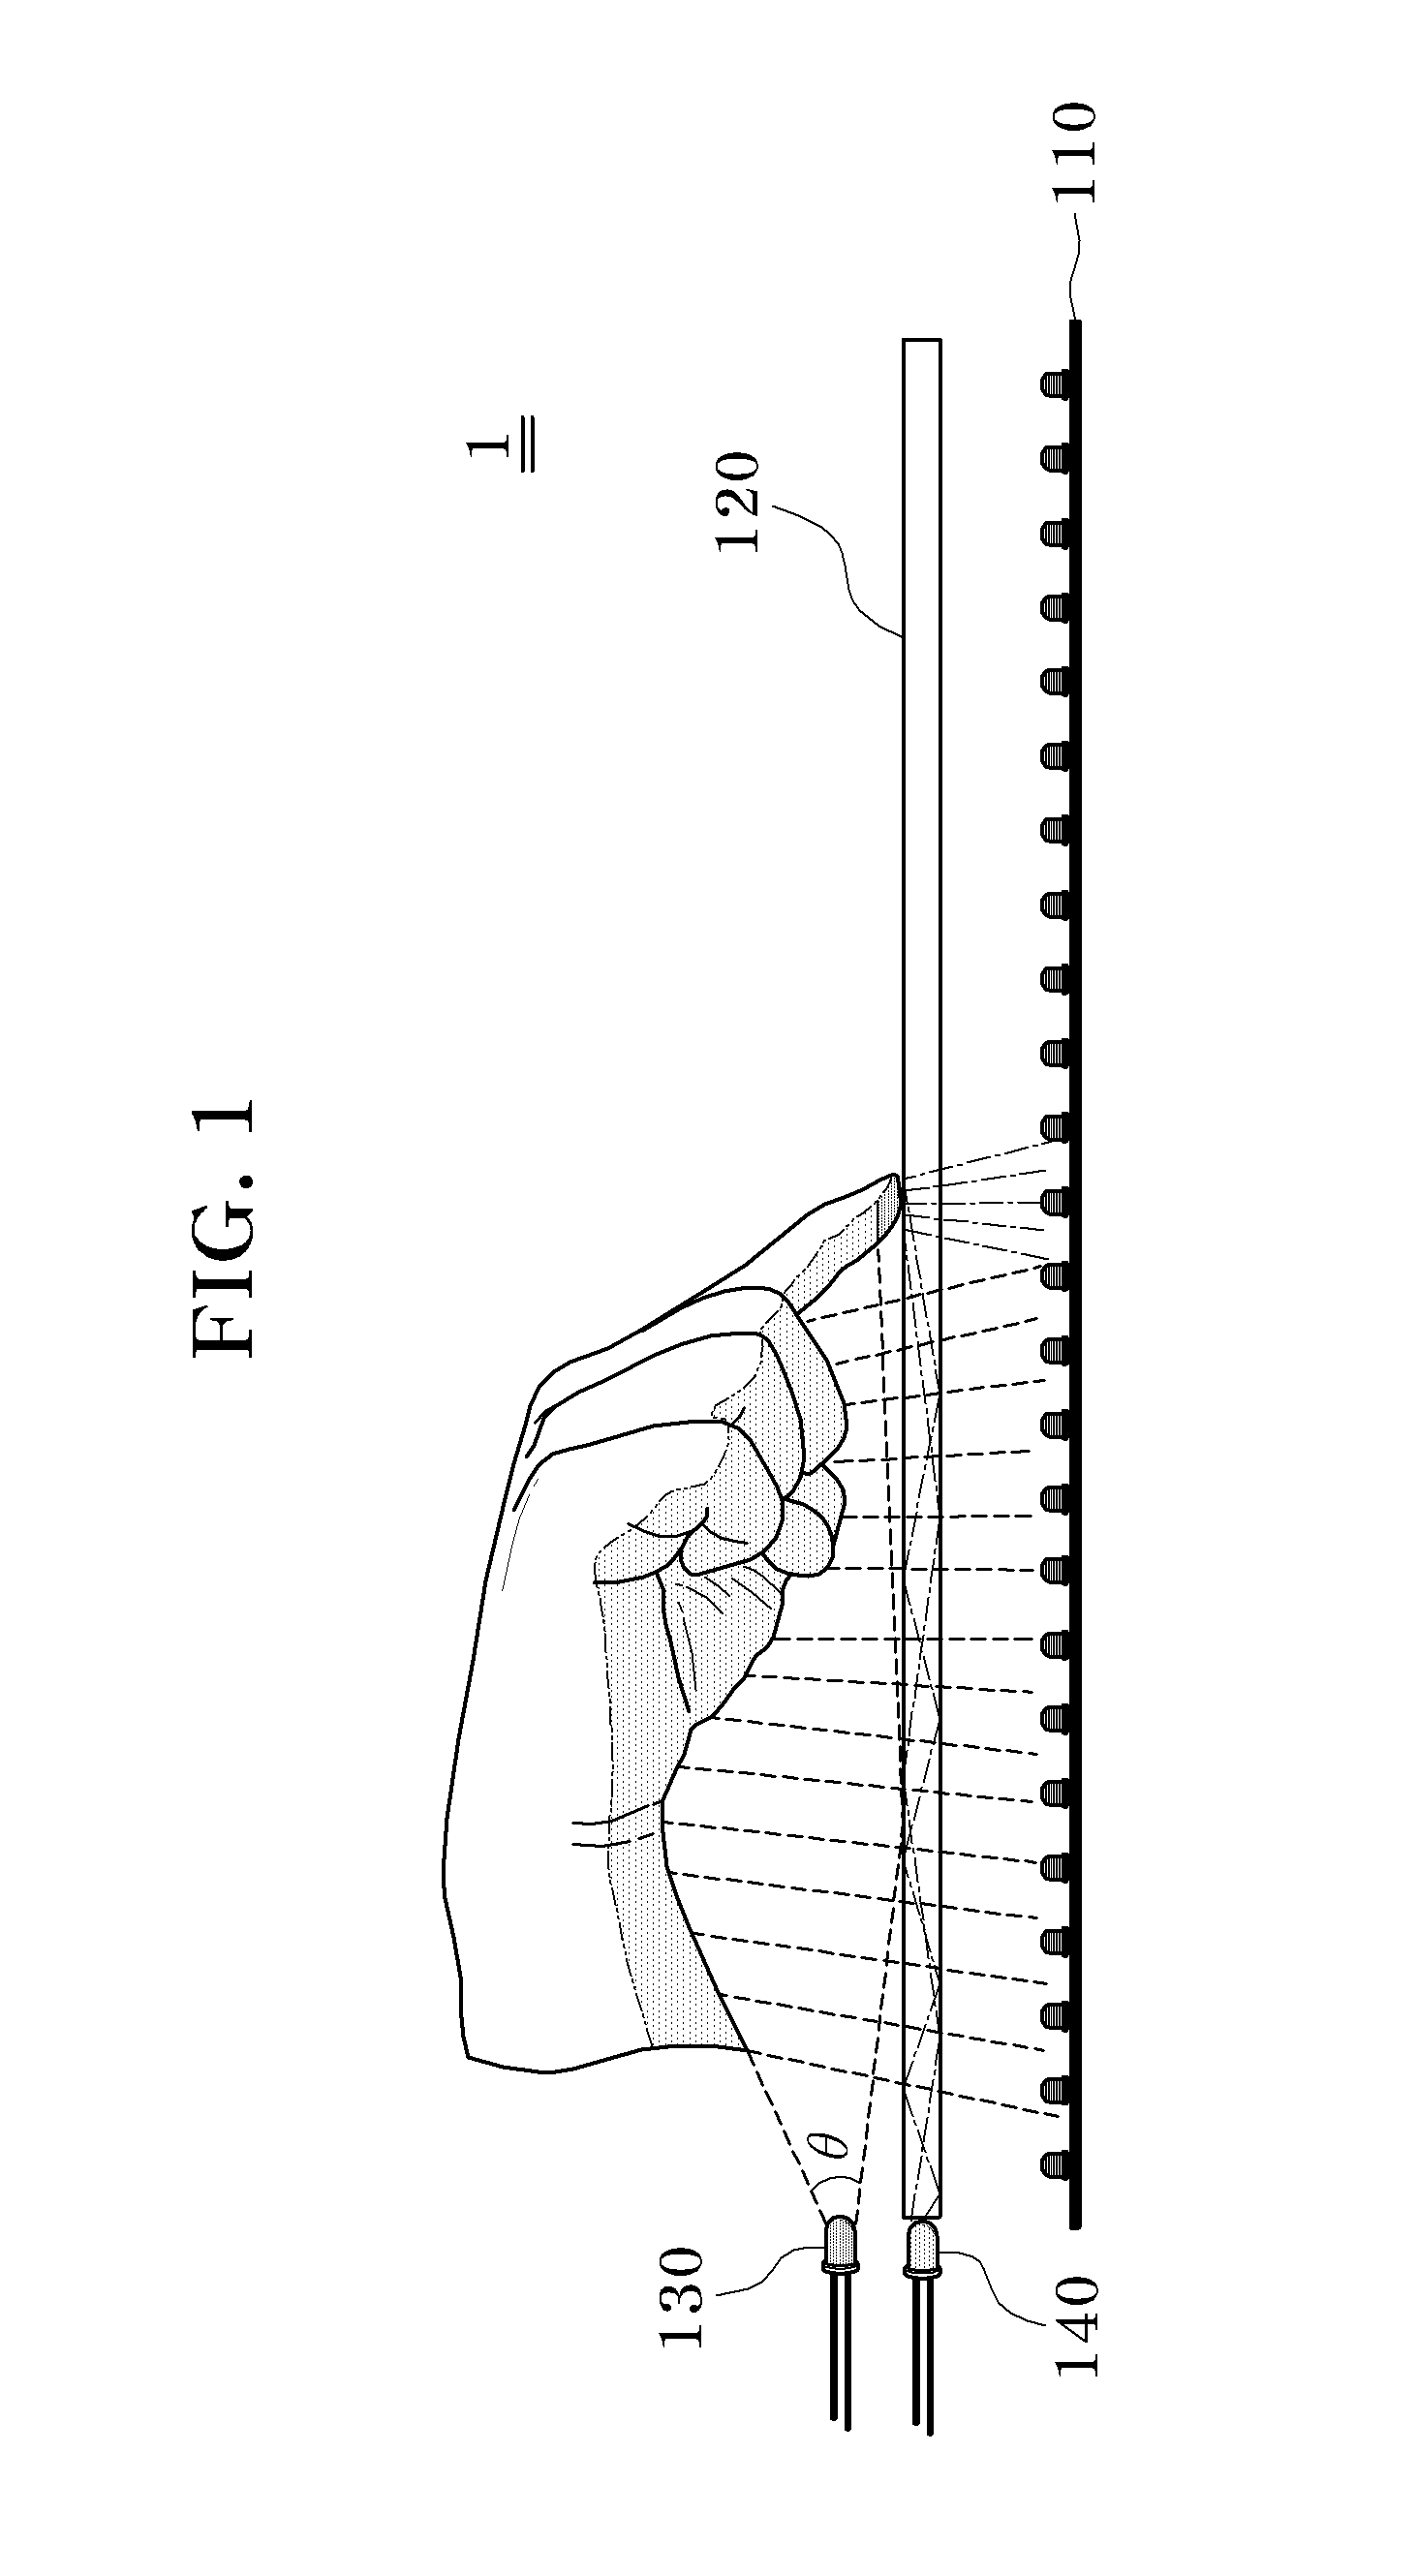 Touch screen apparatus and method for inputting user information on a screen through context awareness